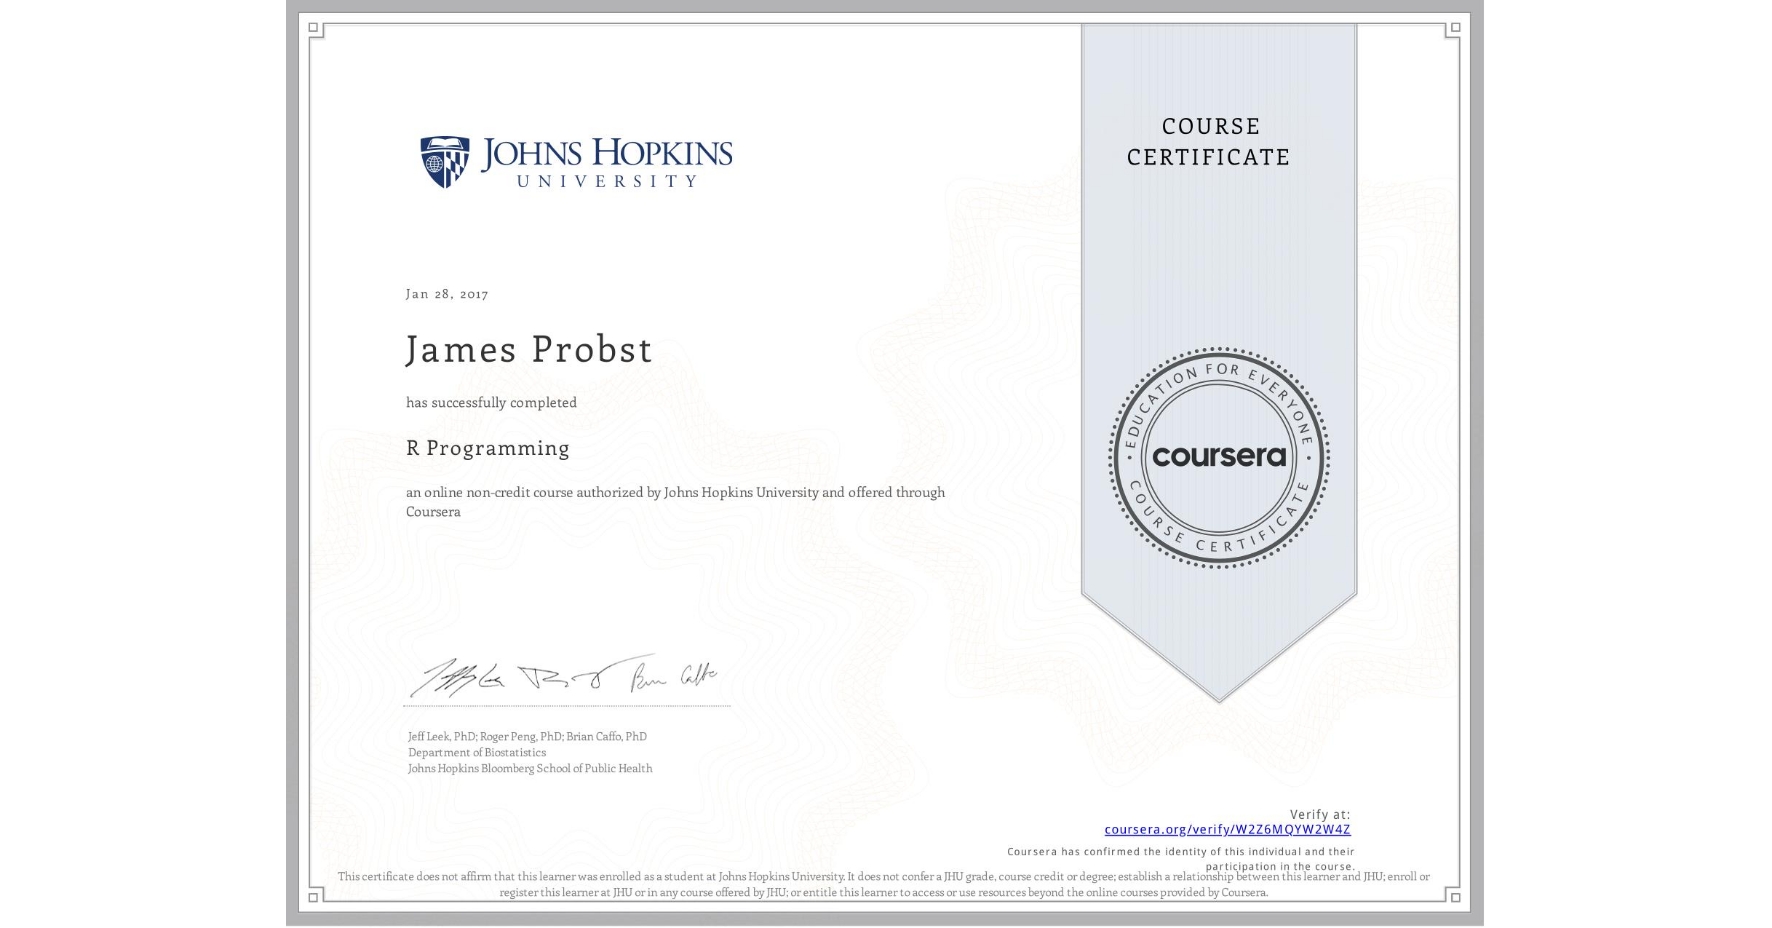 View certificate for James Probst, R Programming, an online non-credit course authorized by Johns Hopkins University and offered through Coursera